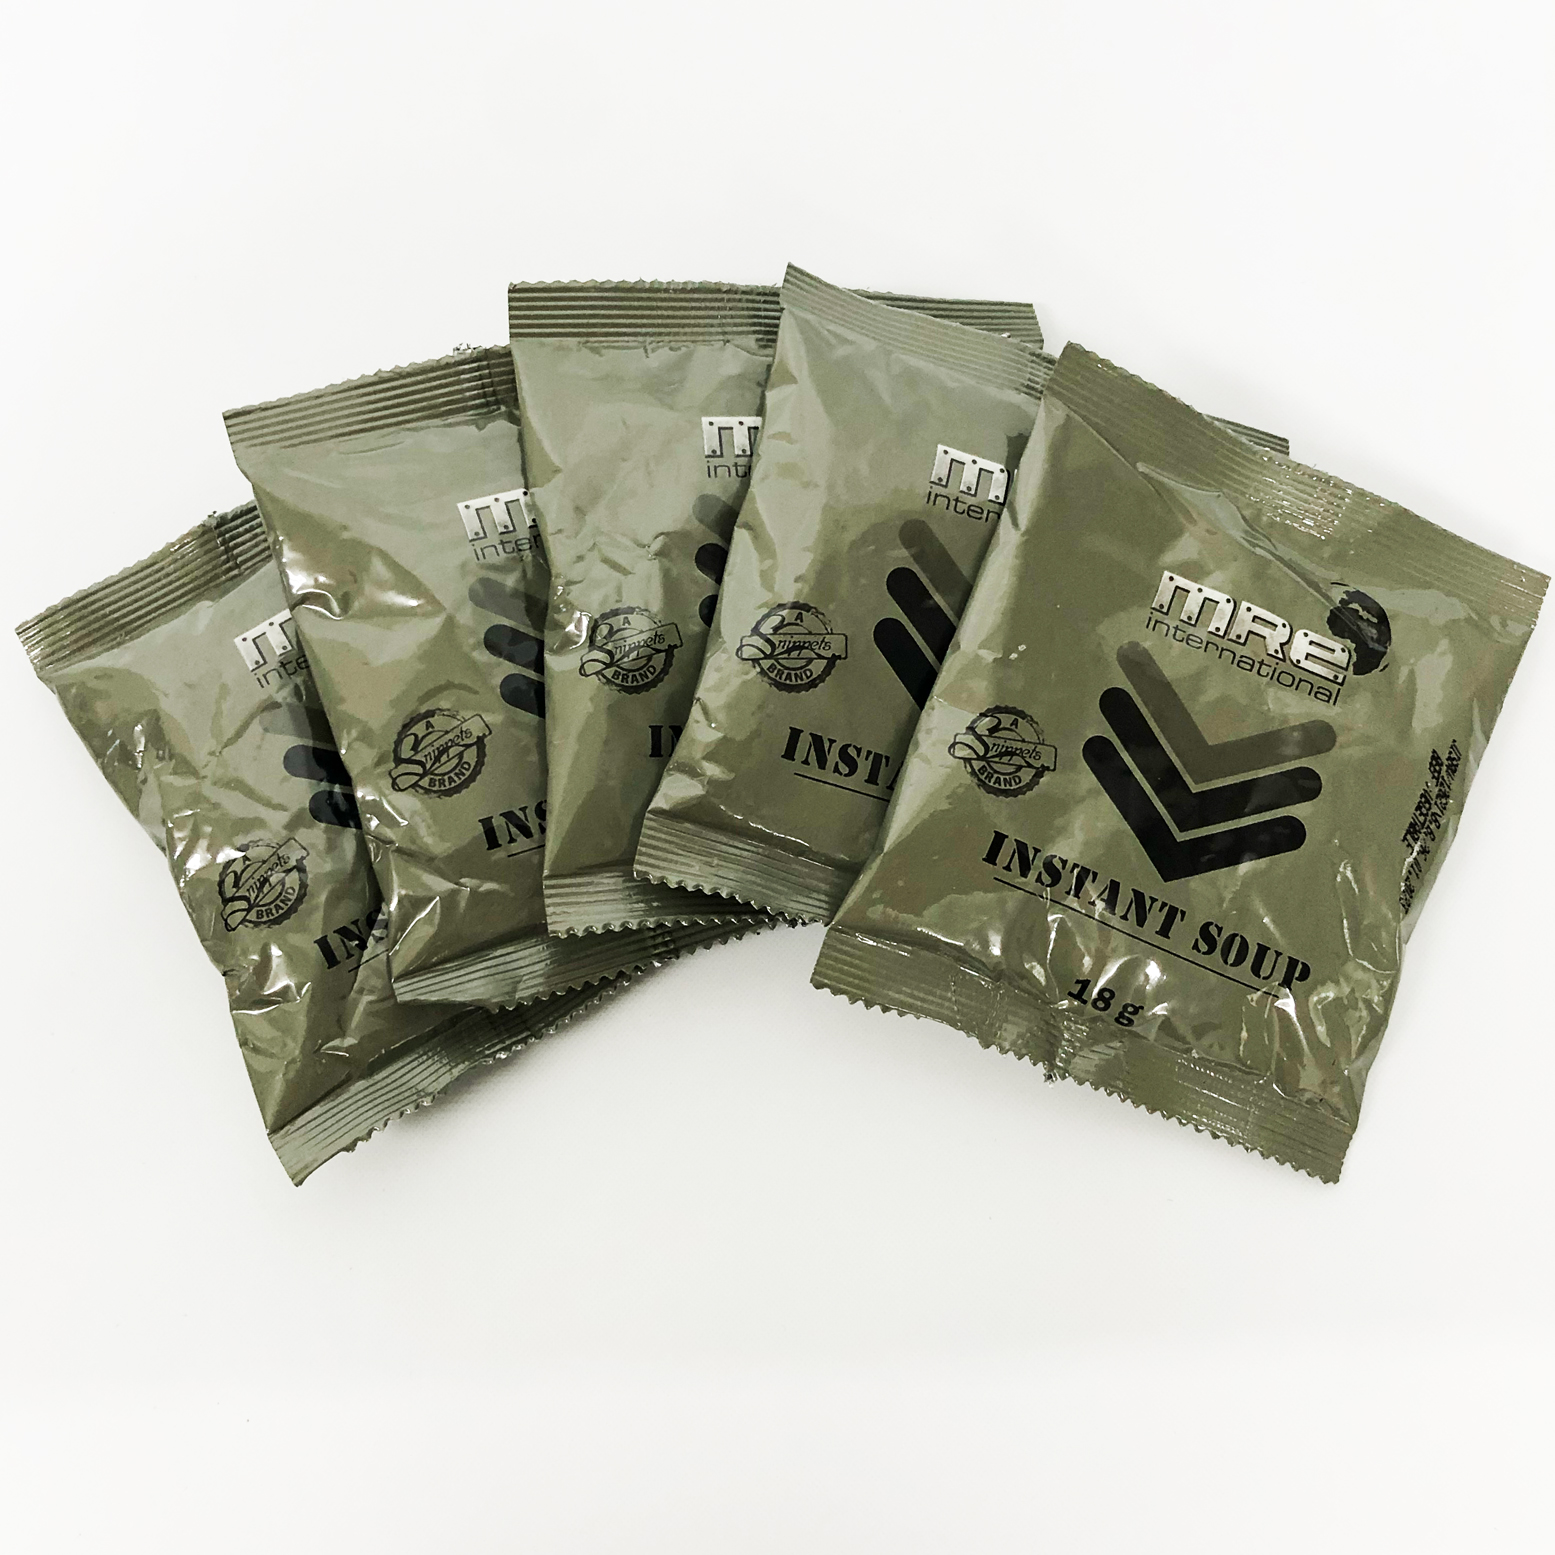 Soup Ration Packs MRE meals ready to eat